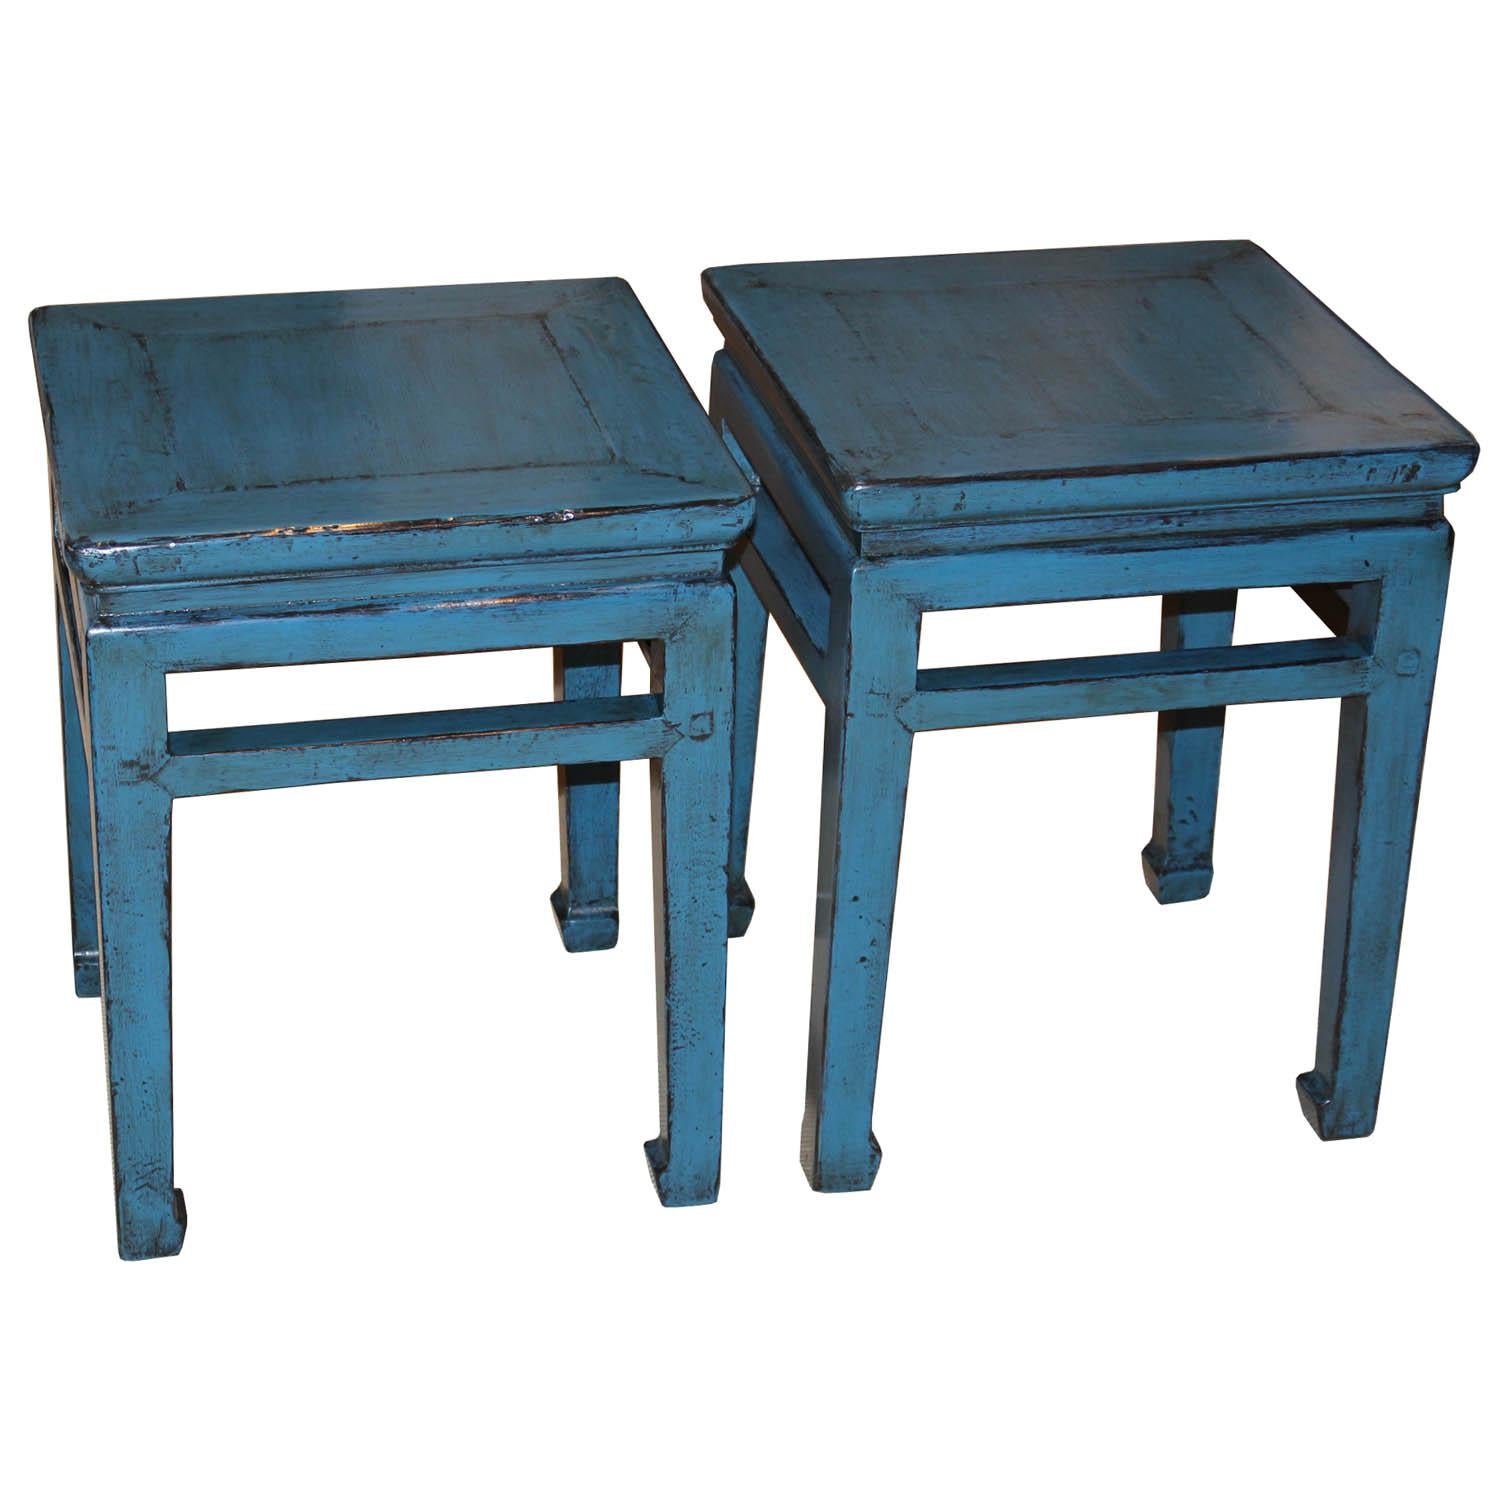 Blue lacquered elmwood Ming-style table with exposed wood edges, support bars and horse hoof-style feet can be used as a pair of coffee tables in front of a sofa or as extra seating. Priced individually not as a pair.